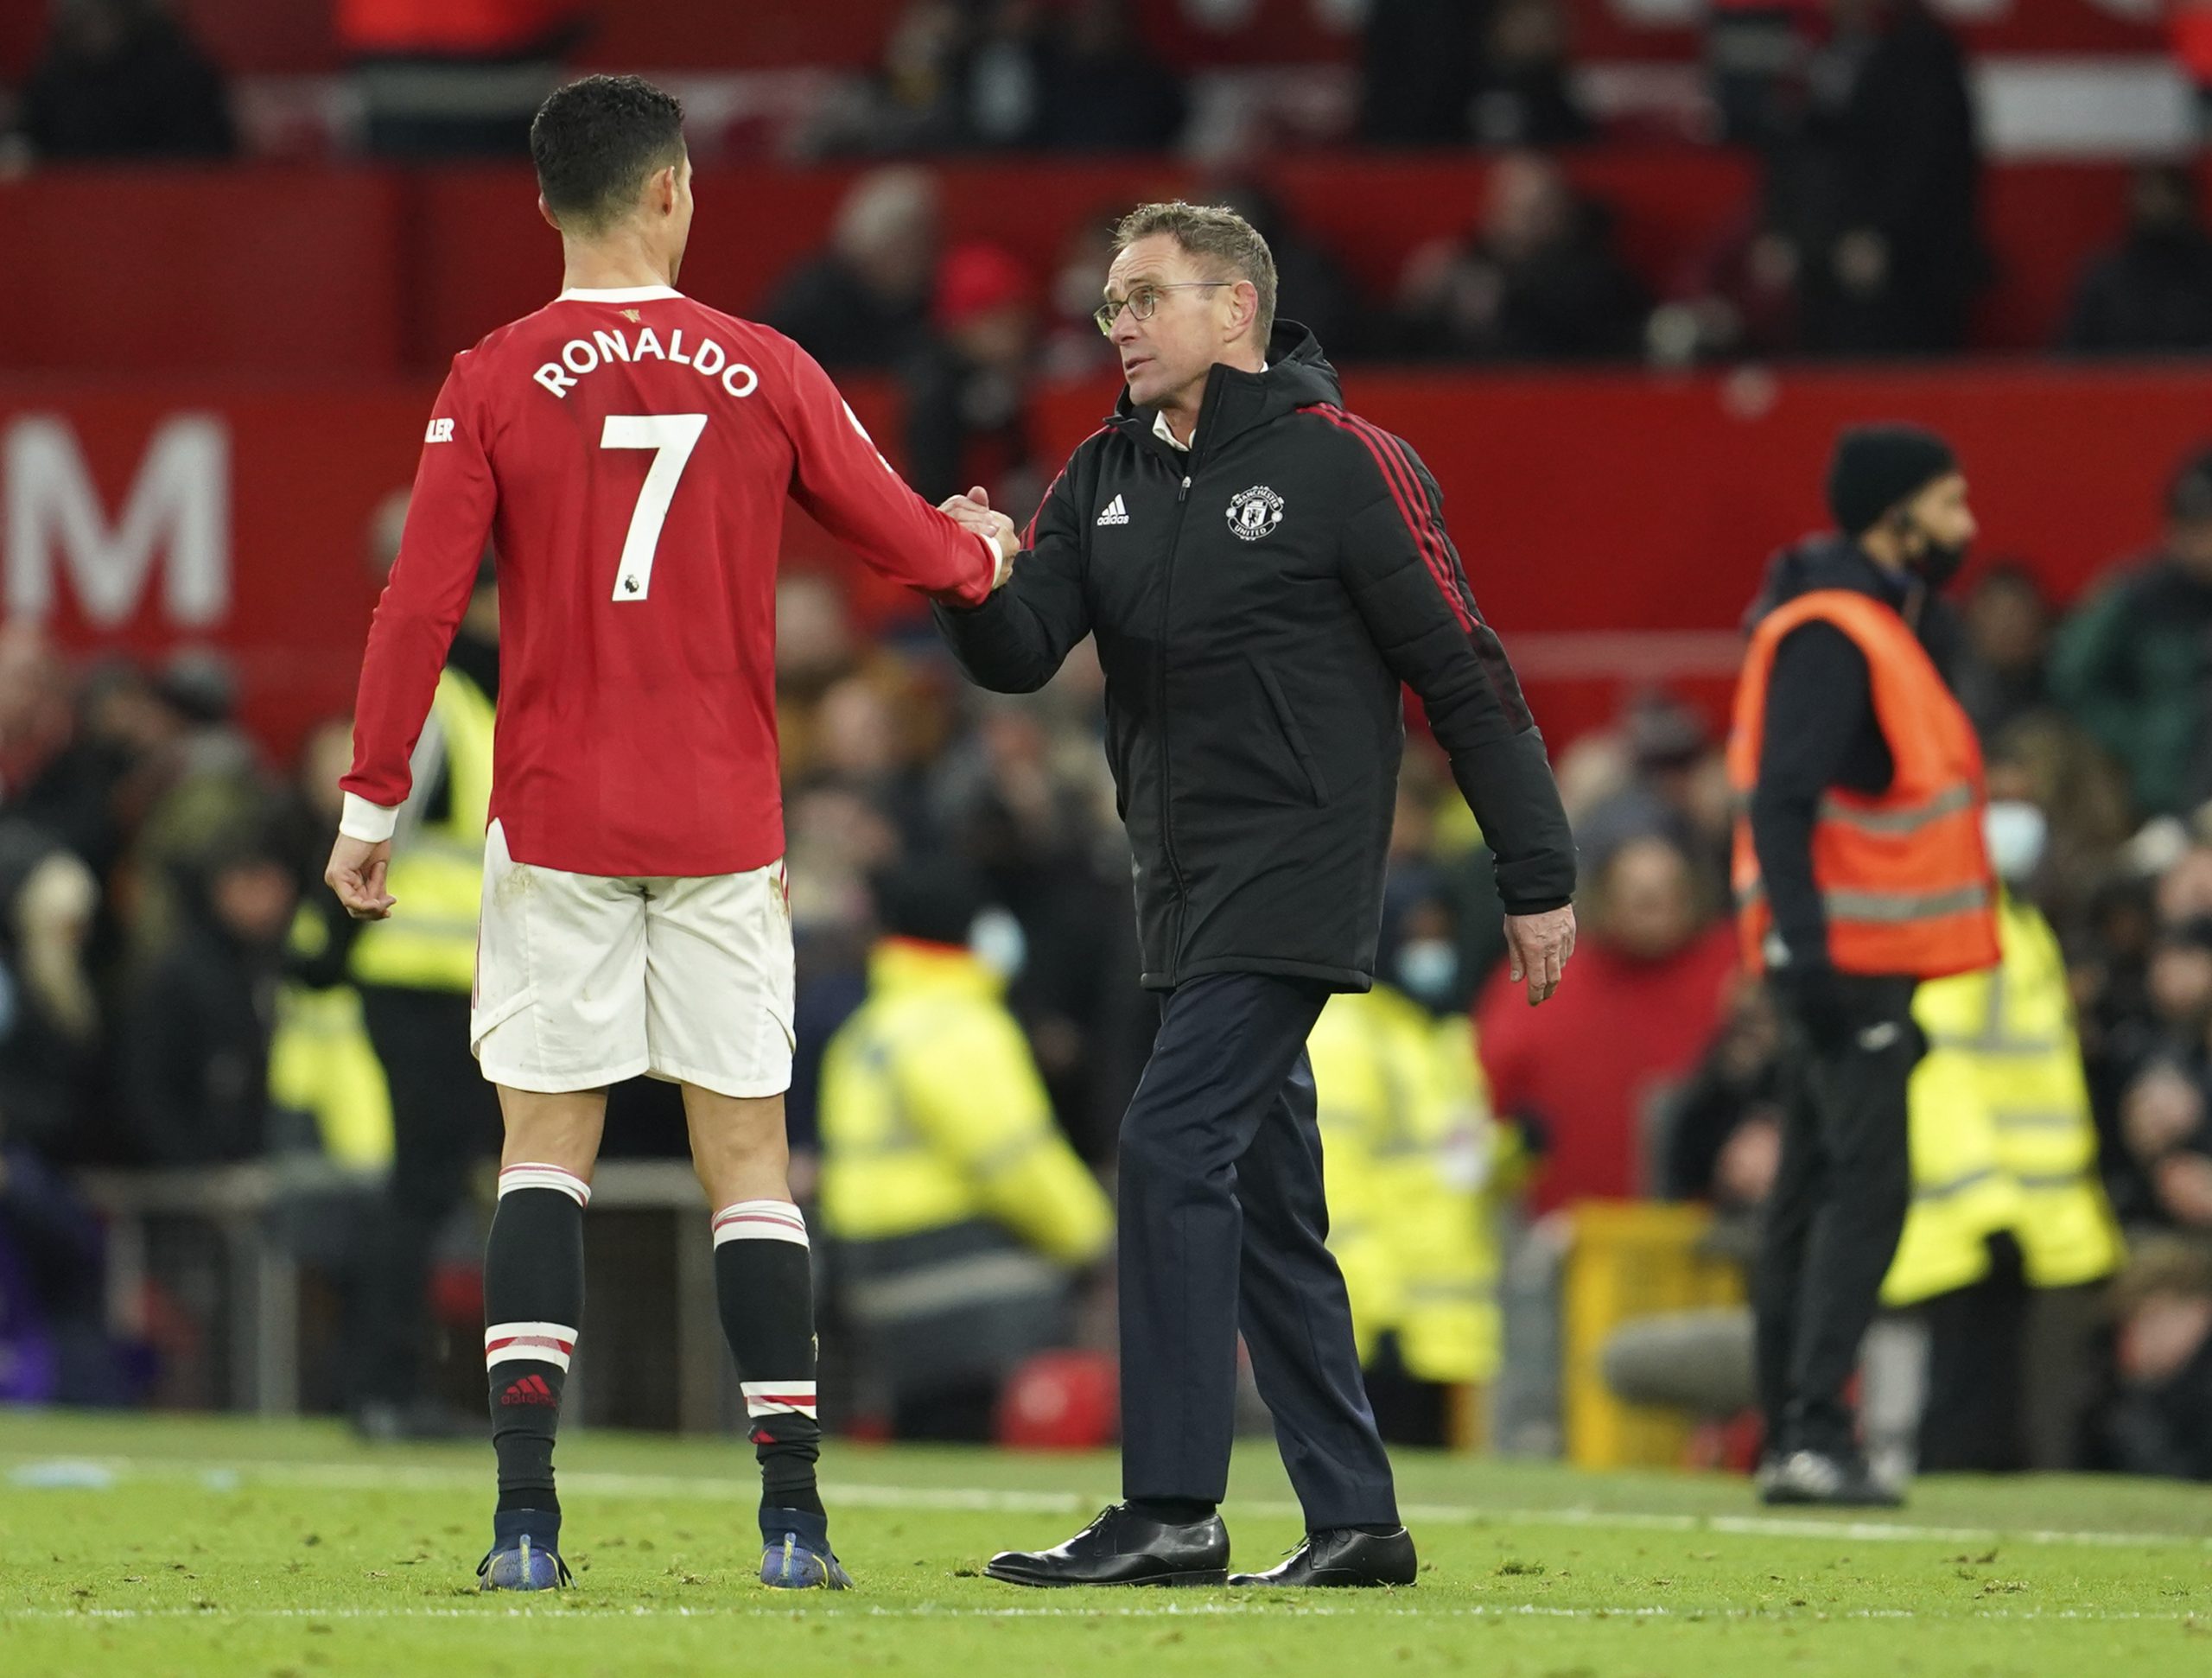 Manchester United's manager Ralf Rangnick shakes hands with Manchester United's Cristiano Ronaldo at the end of the English Premier League soccer match between Manchester United and Crystal Palace at Old Trafford stadium in Manchester, England, Sunday, Dec. 5, 2021. (AP Photo/Jon Super)